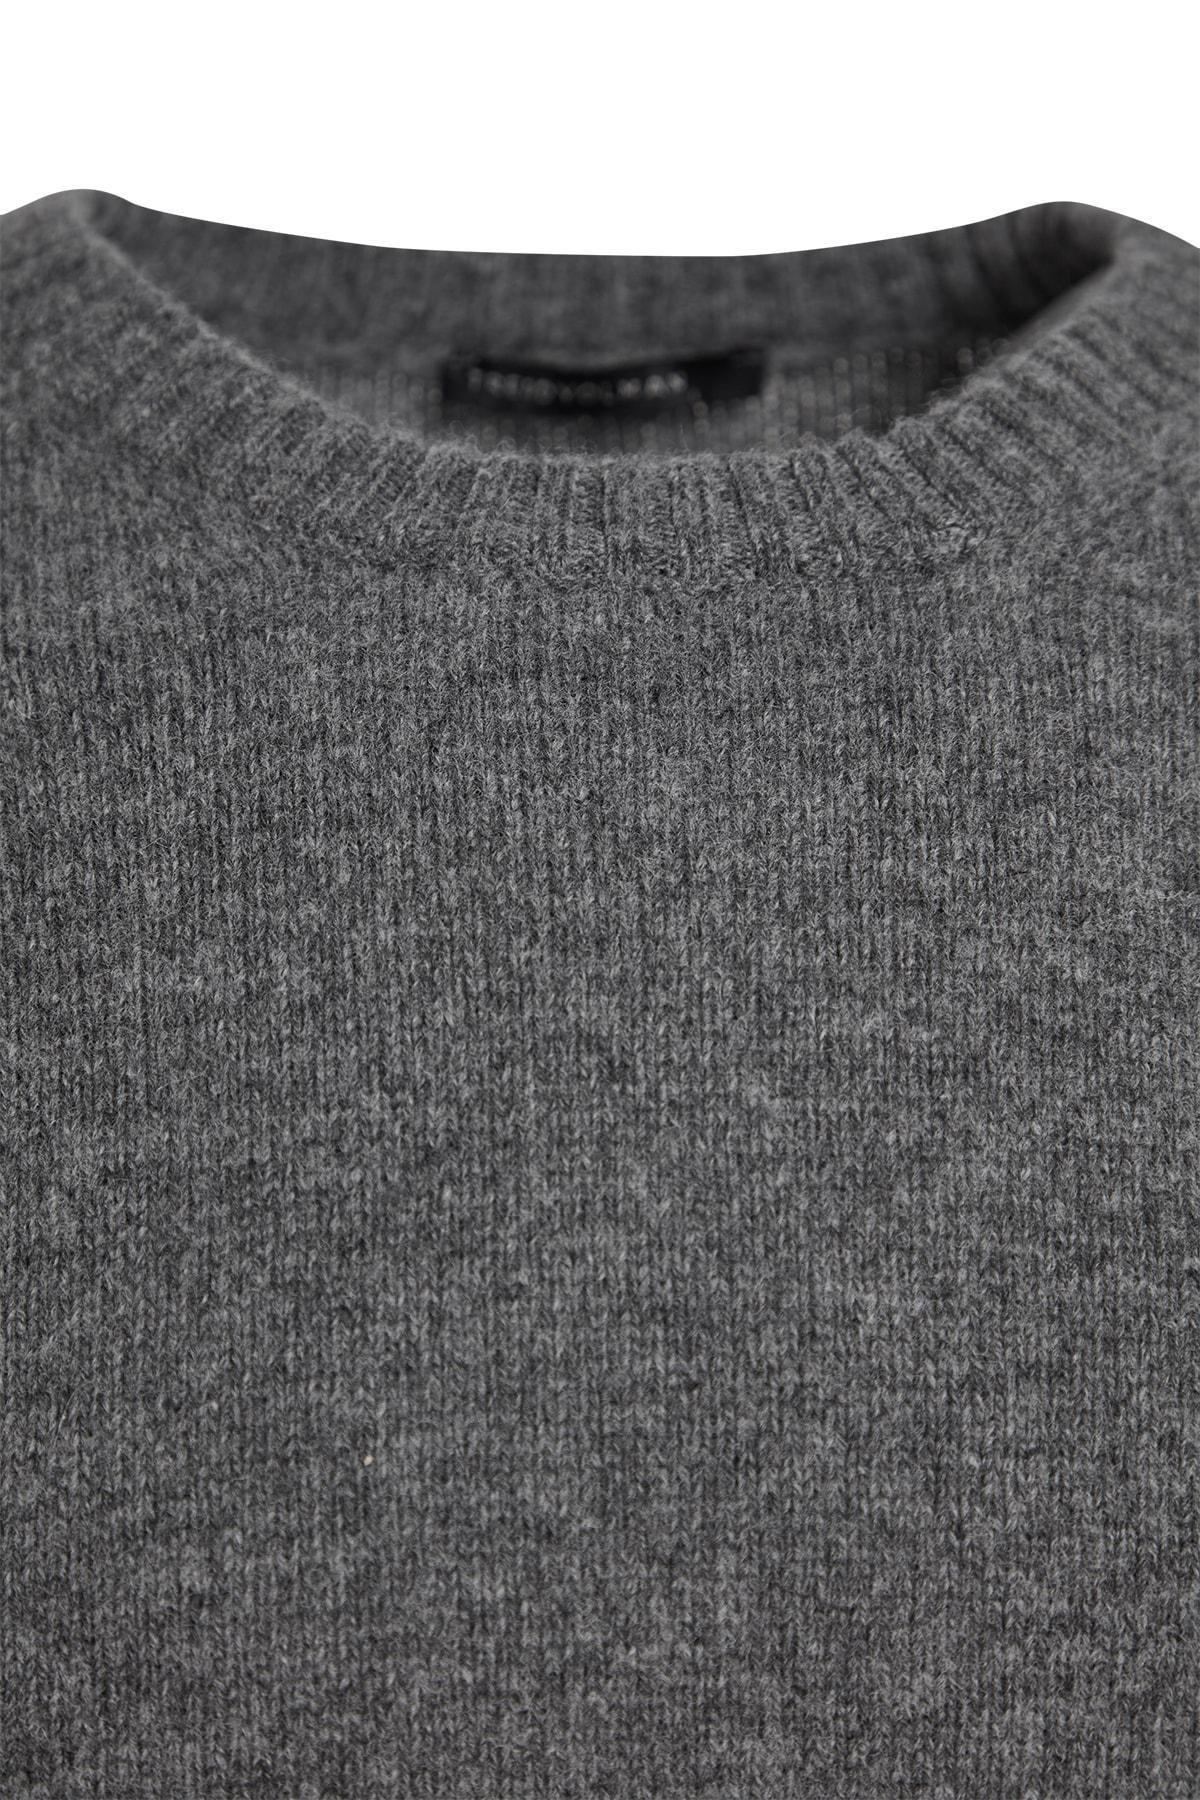 Trendyol - Gray Crew Neck Limited Edition Knitted Sweater<br>